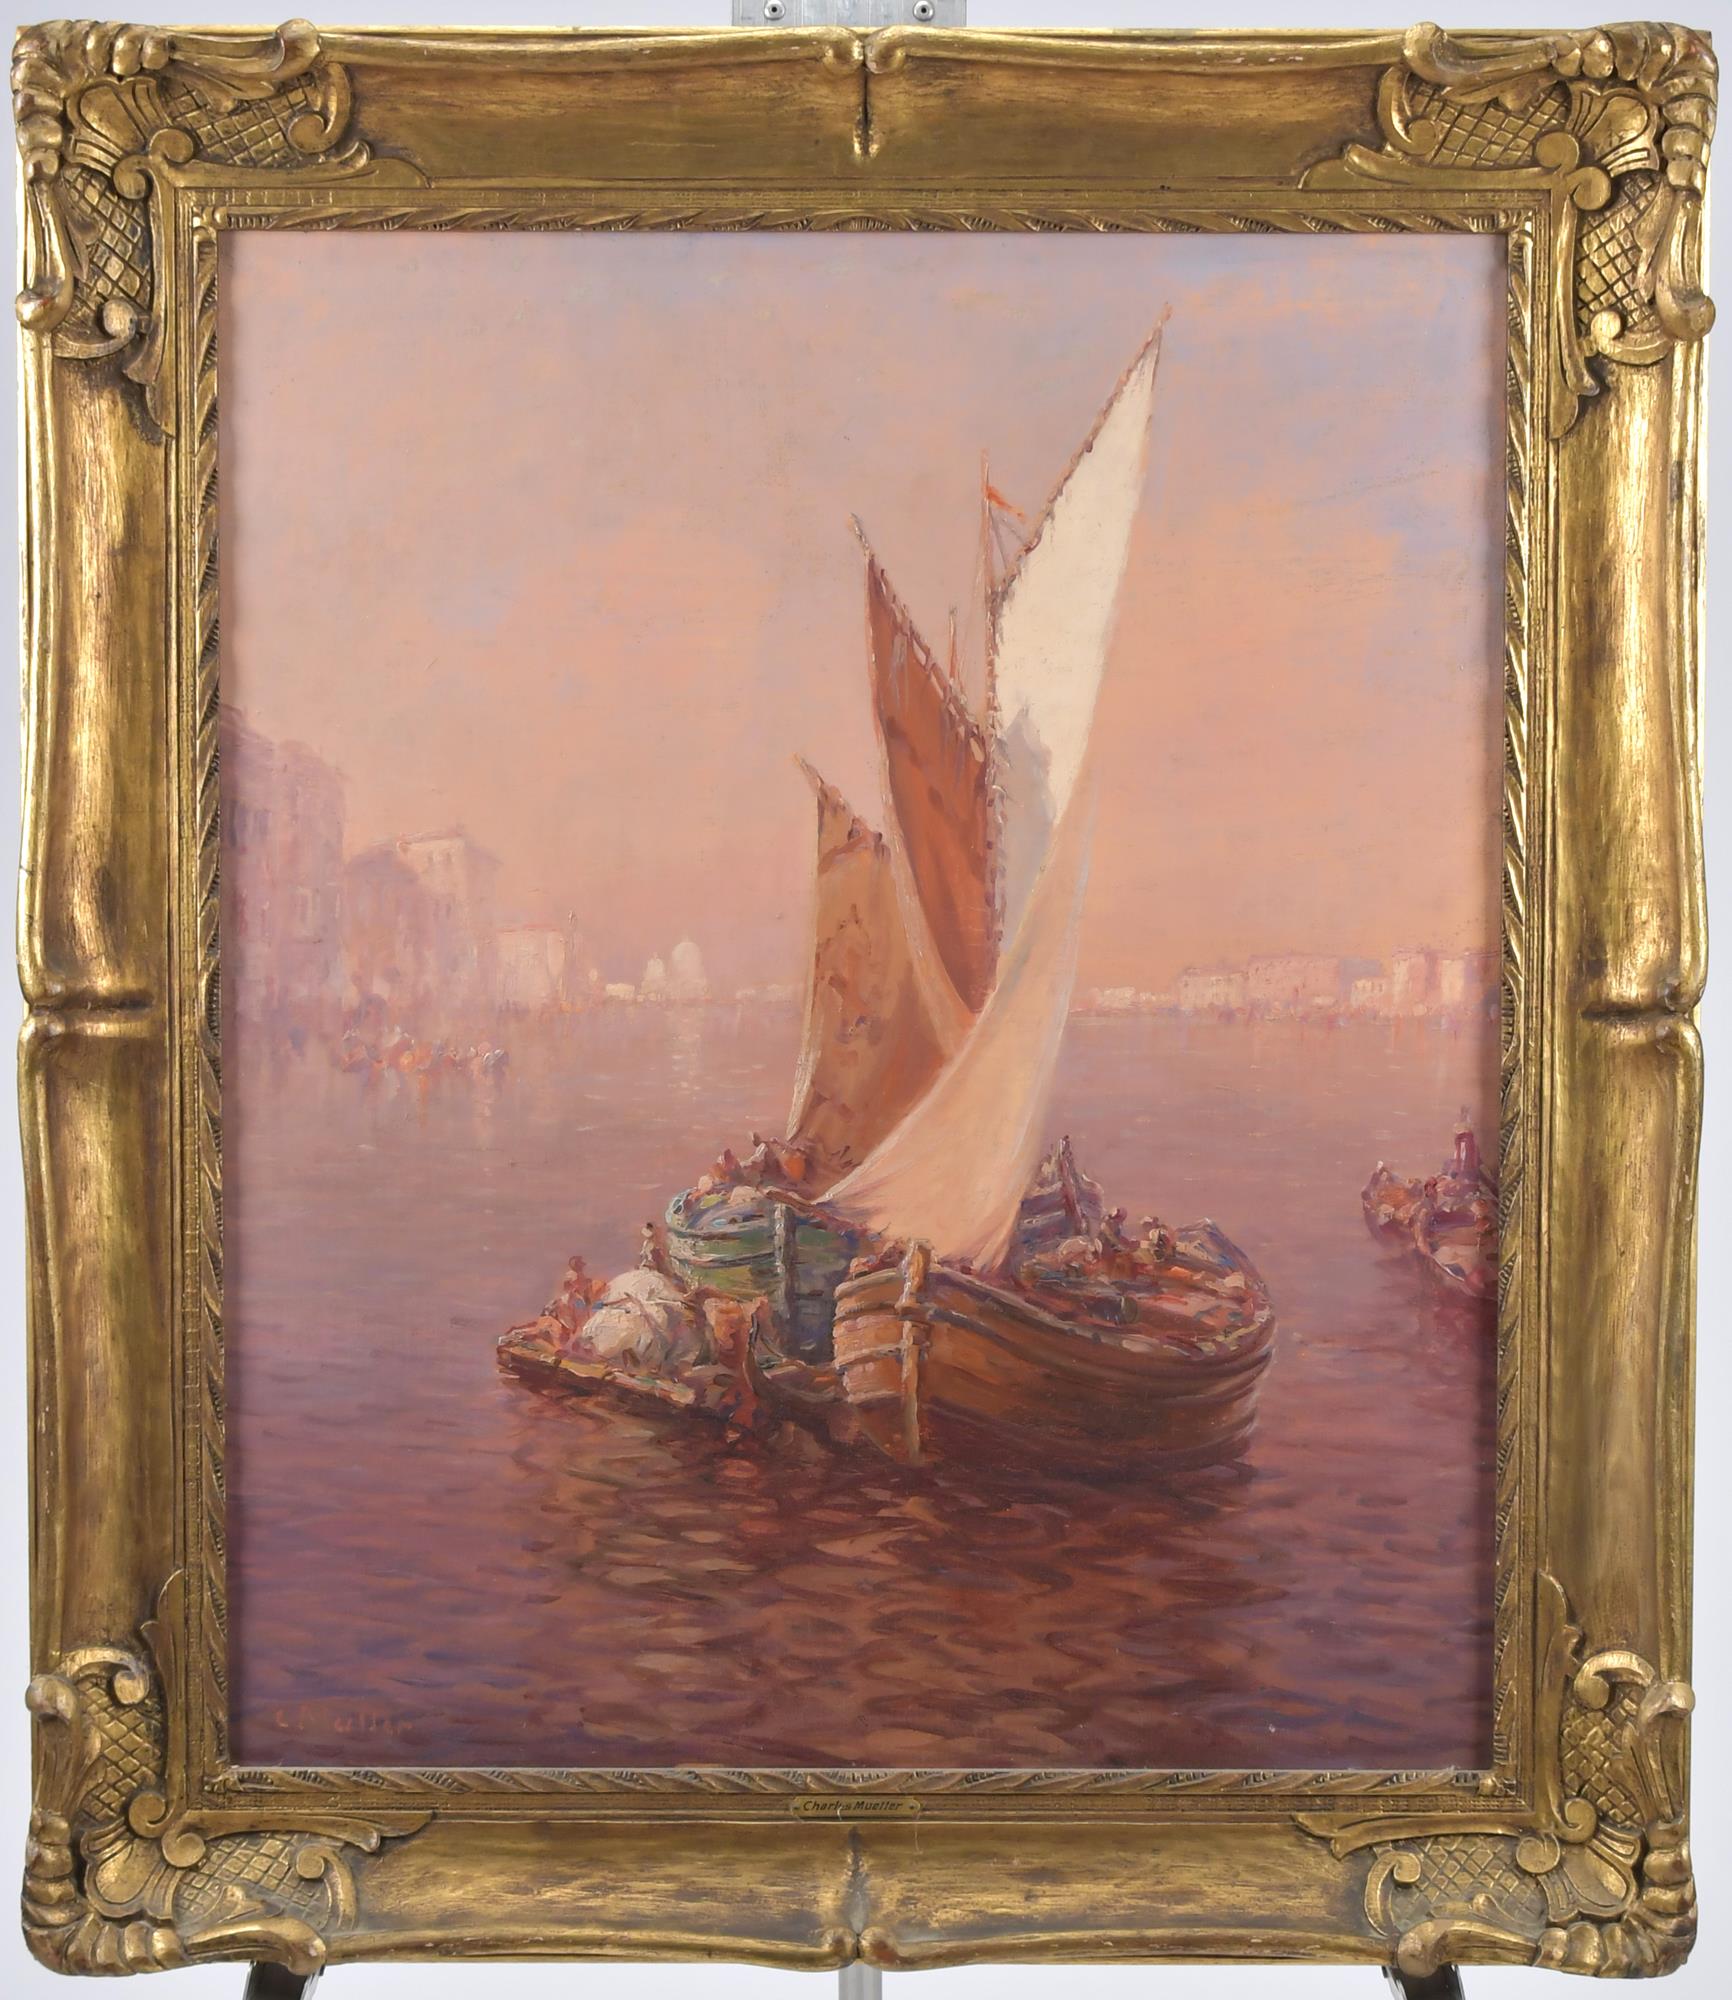 C. MULLER OIL, BOATS. Oil on canvas